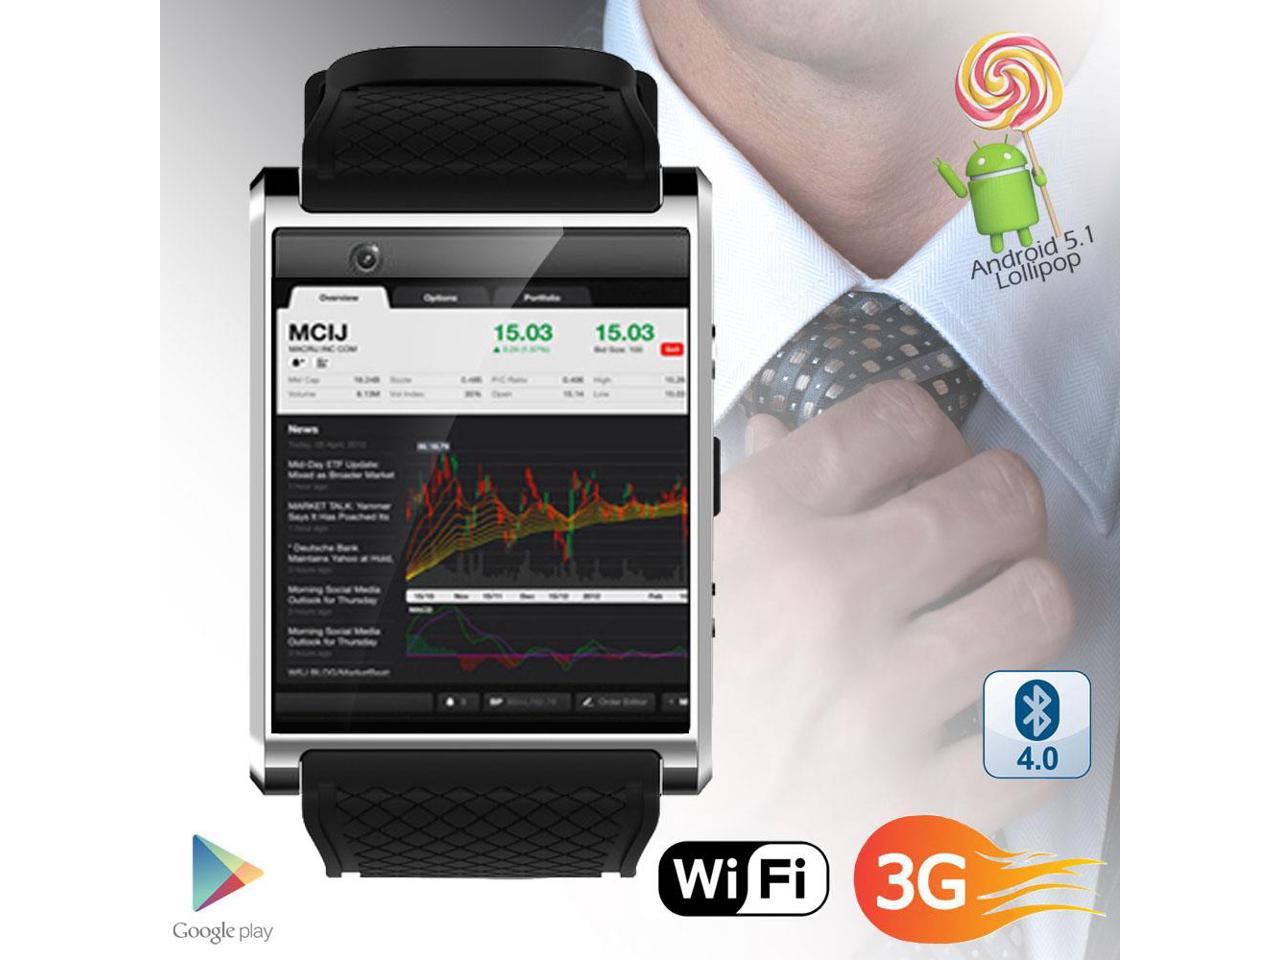 GSM Unlocked Android SmartWatch by Indigi® (1.54-inch AMOLED Display + QuadCore CPU + WiFi + GPS + Bluetooth 4.2 Sync)